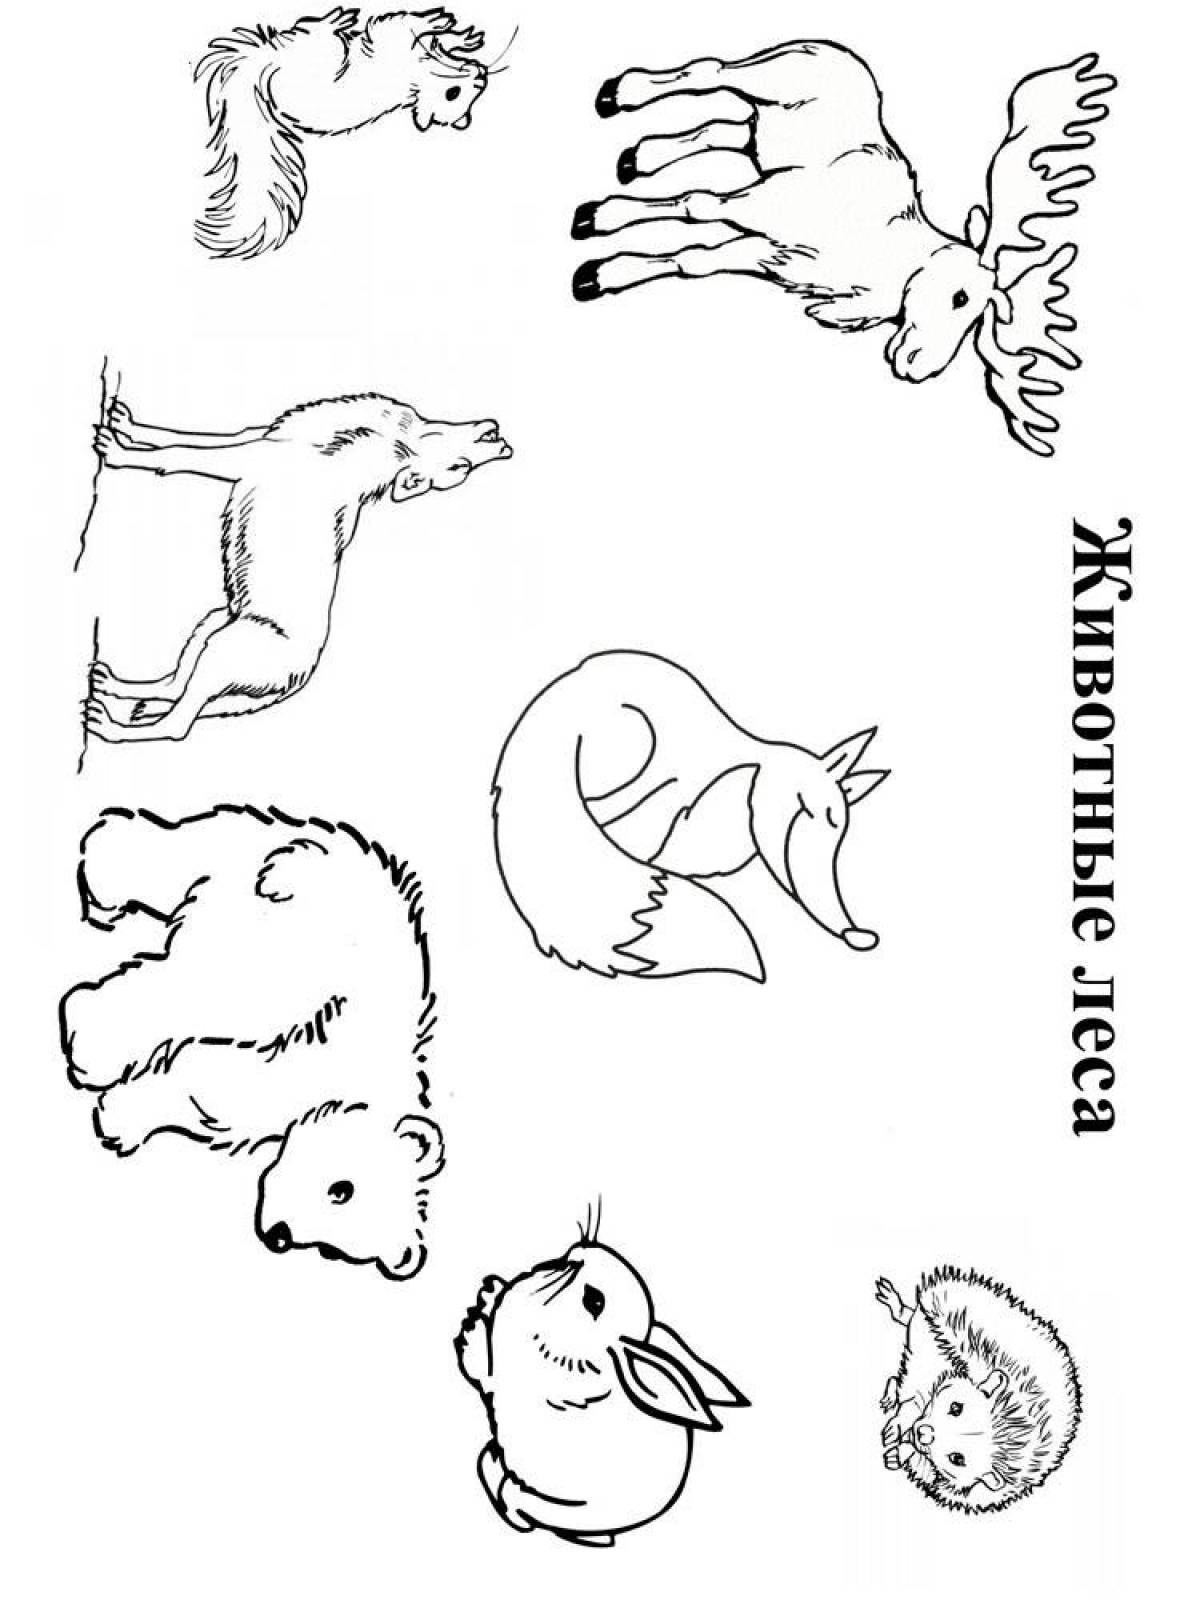 Incredible wild animal coloring book for 4-5 year olds